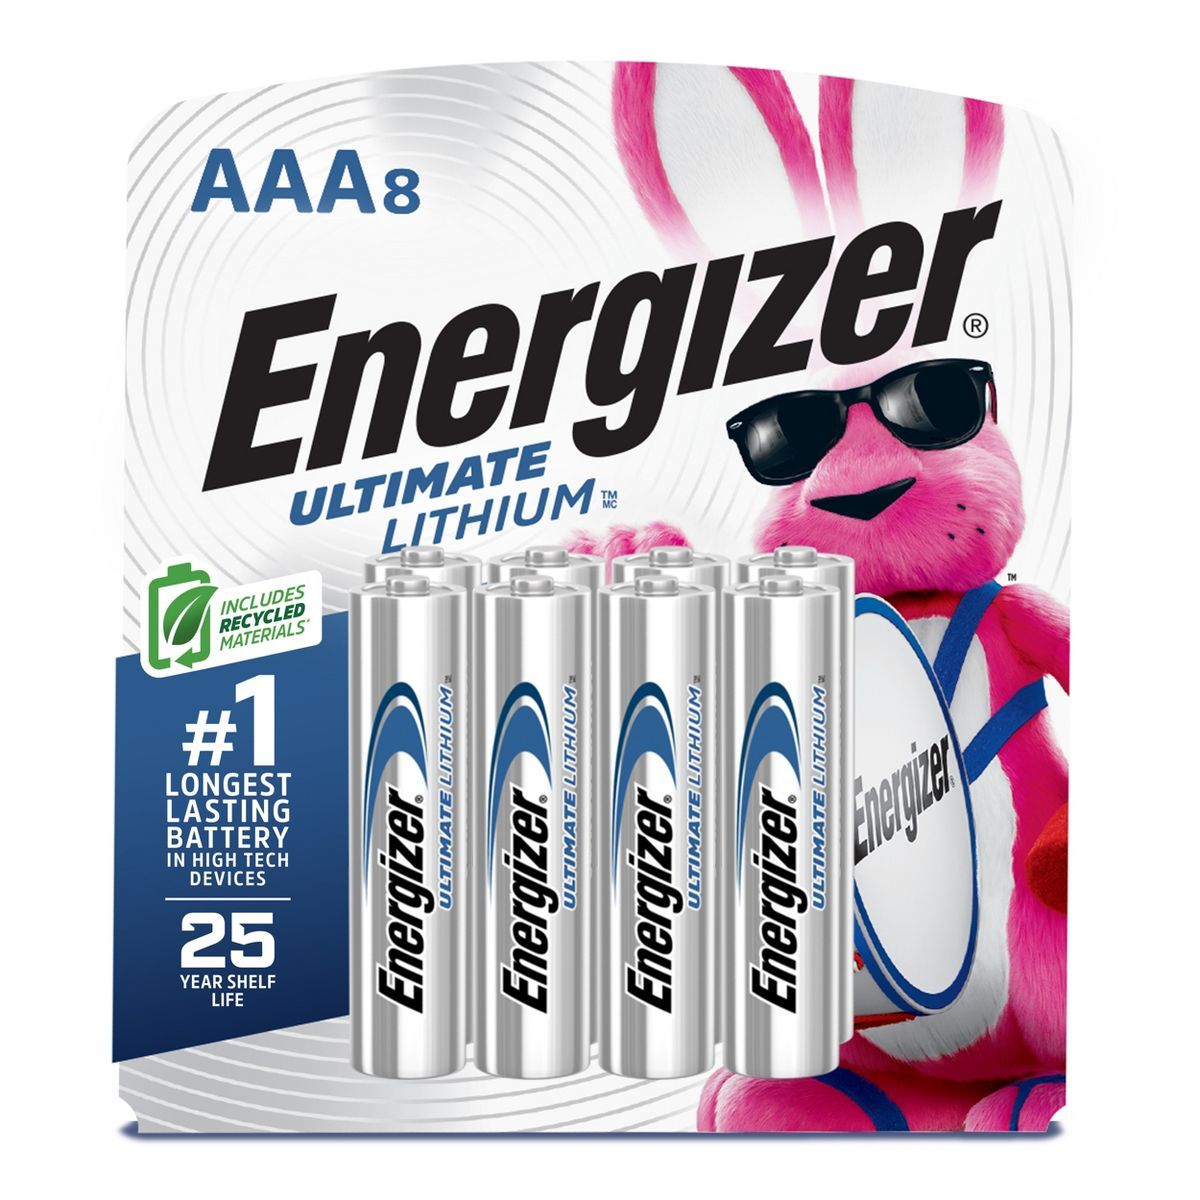 Energizer Ultimate Lithium AAA Batteries - Lithium Battery | Target